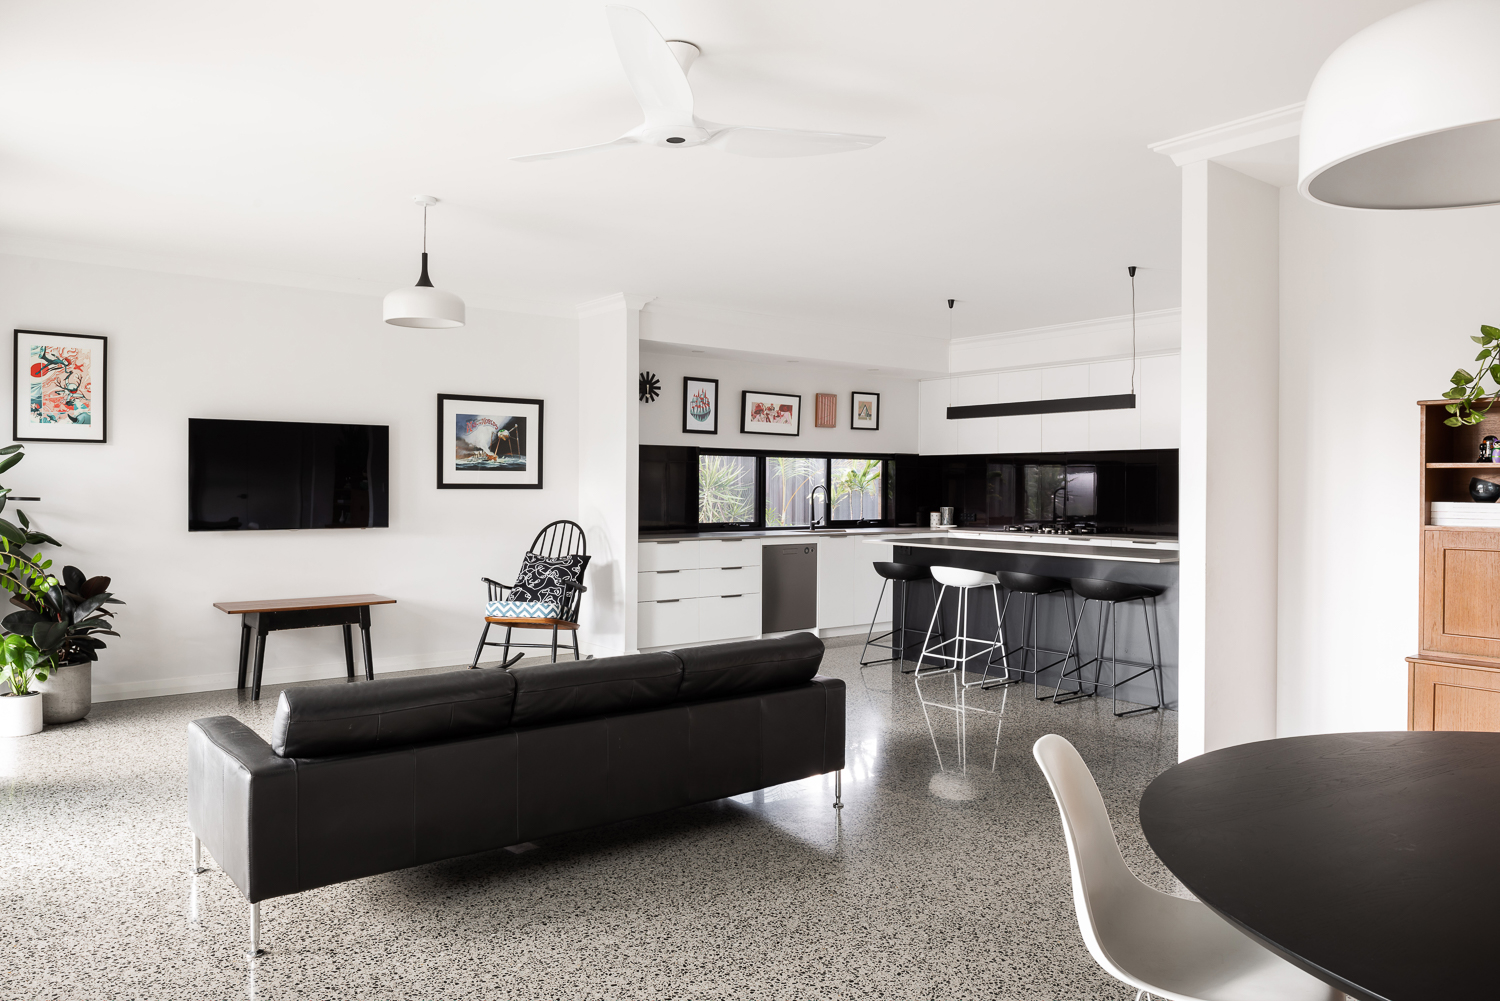 Open-plan living space of the James Street Residence, by Romona Sandon Designs. Image by Dion Robeson.